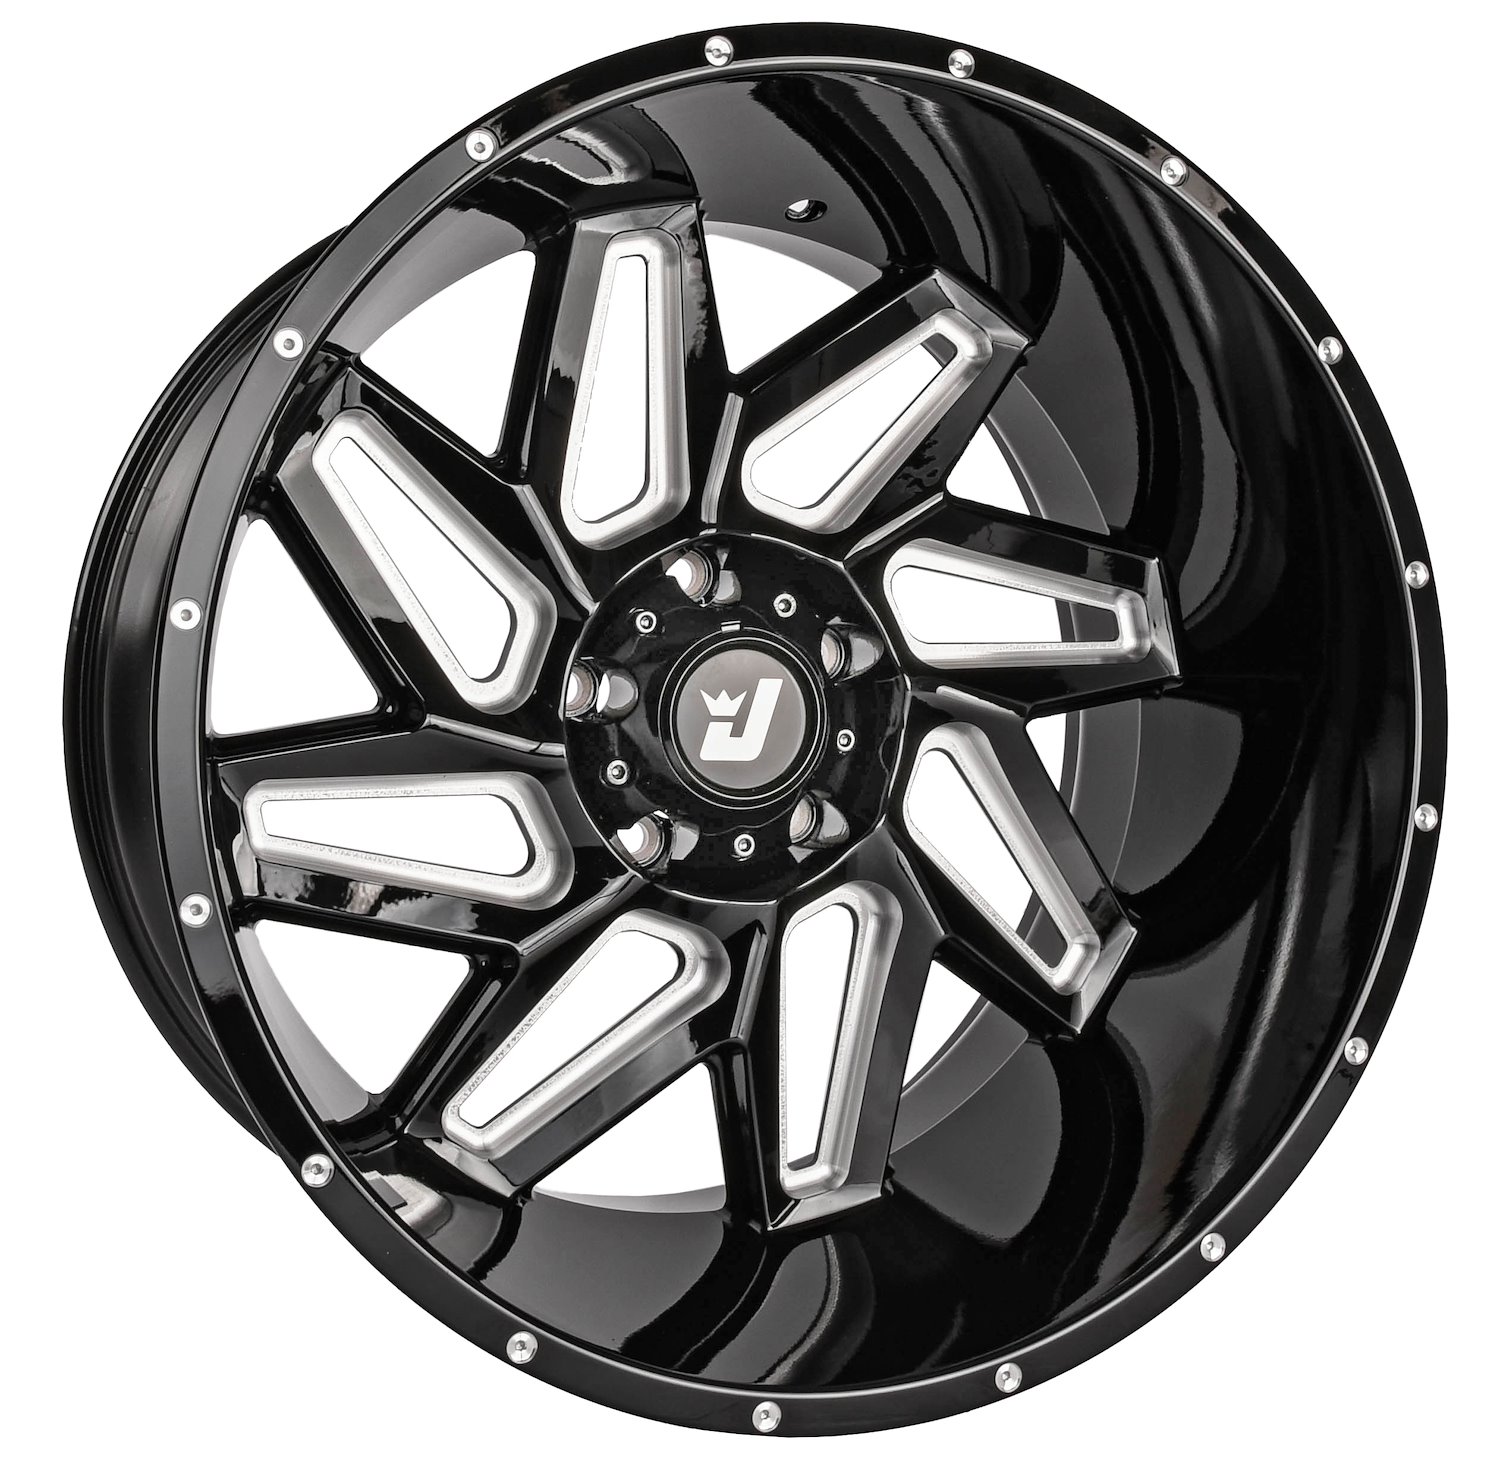 Catalyst Wheel [Size: 22" x 12"] Gloss Black with Milled Spokes